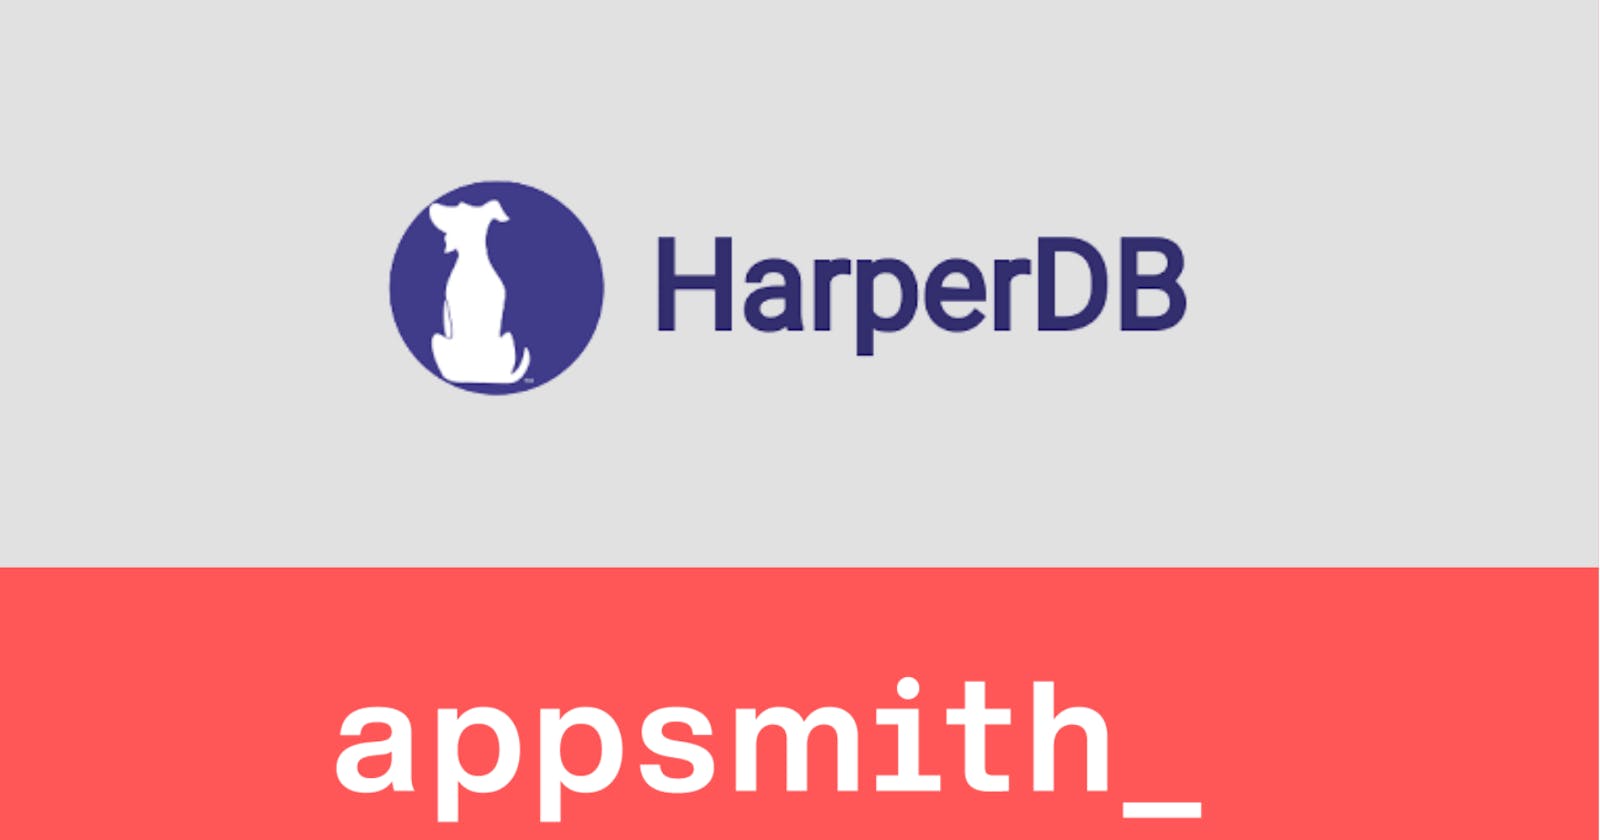 Building An Inventory Tool Using Appsmith and HarperDB